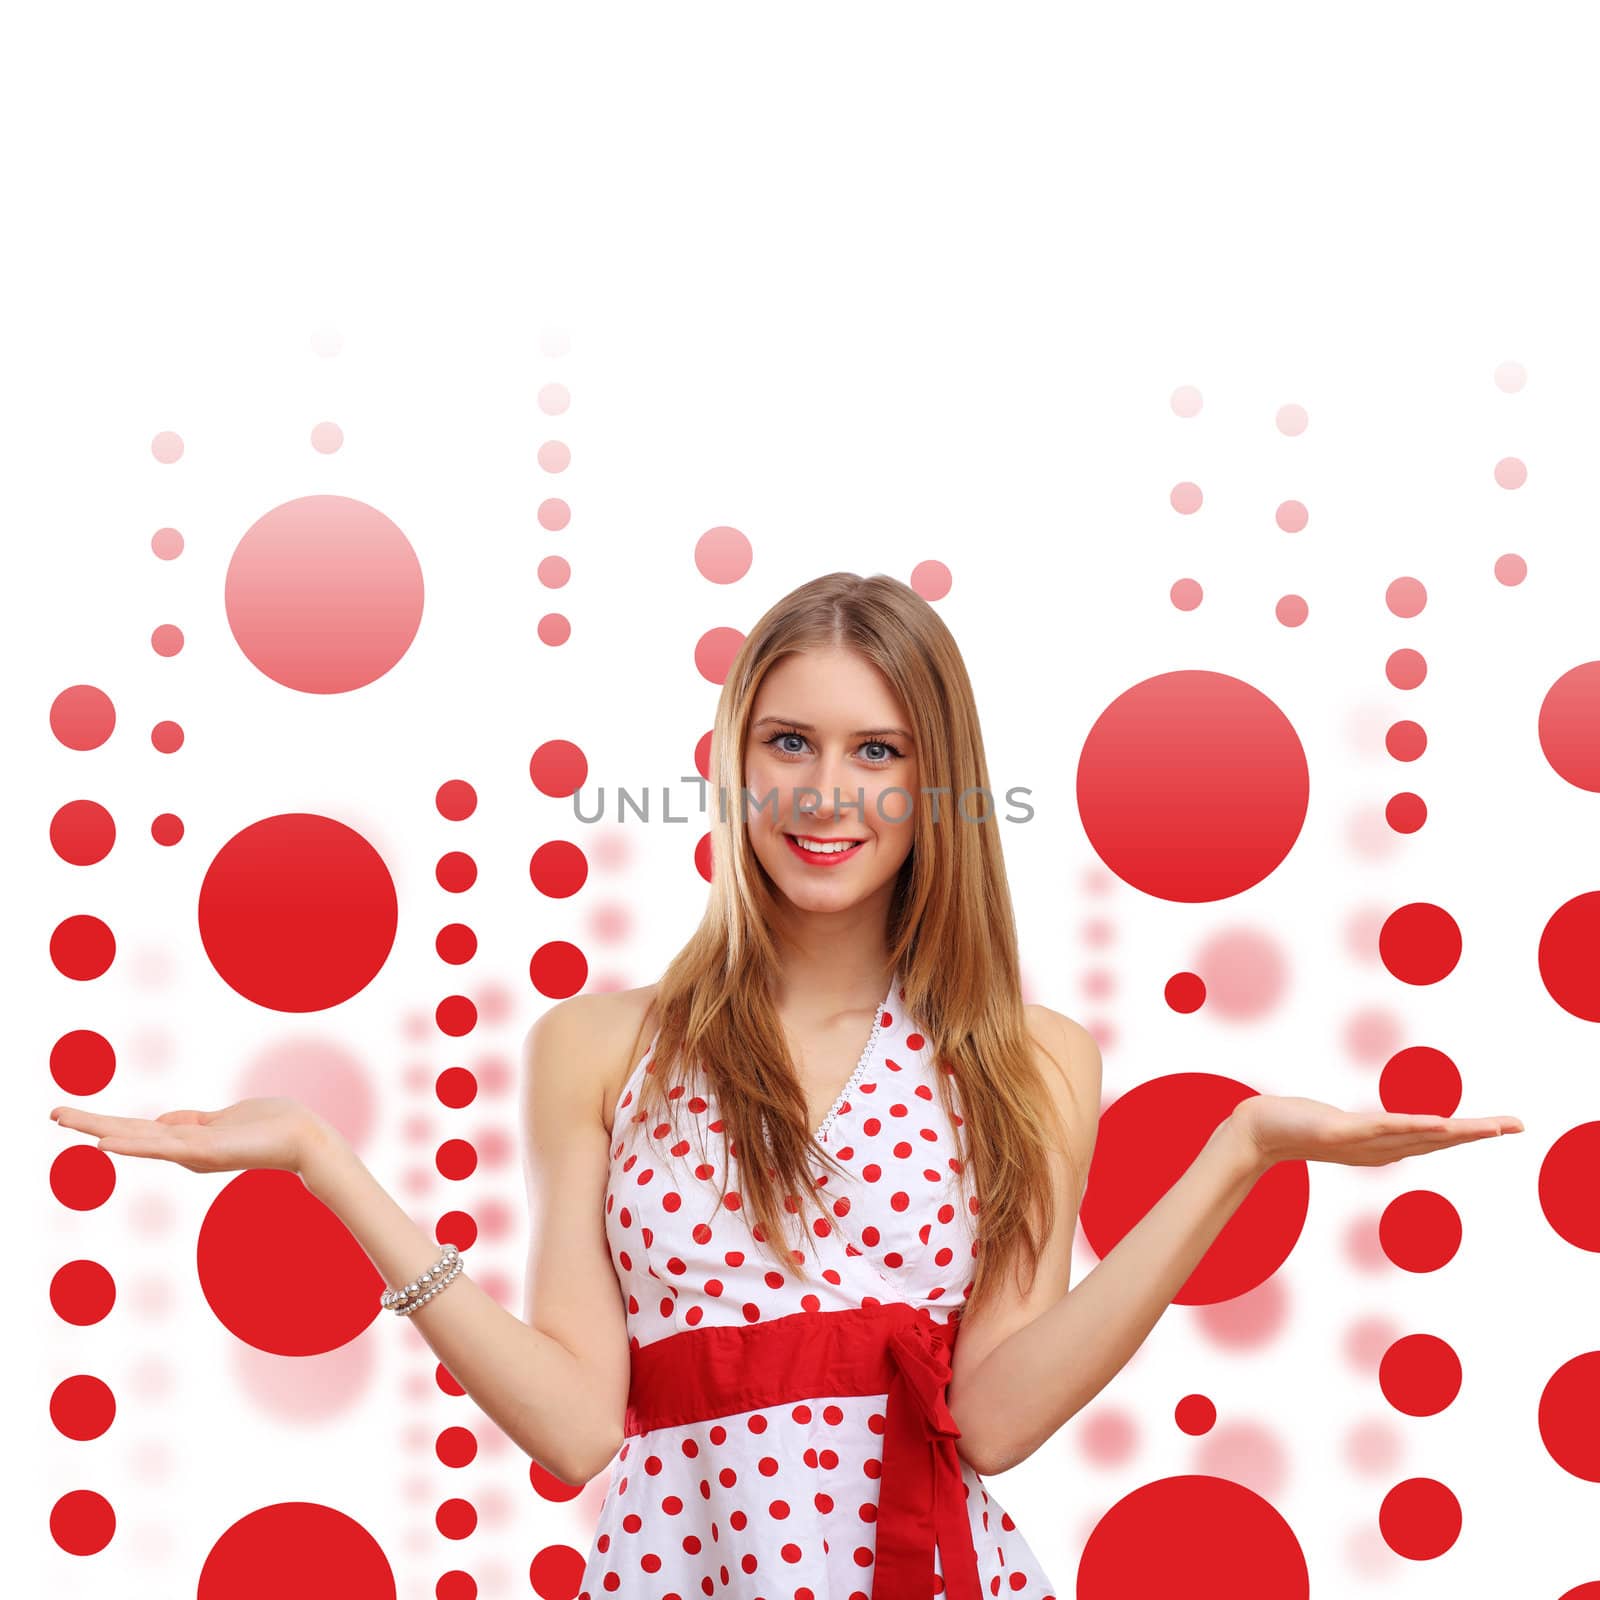 Young blond woman in red dress with red circles around